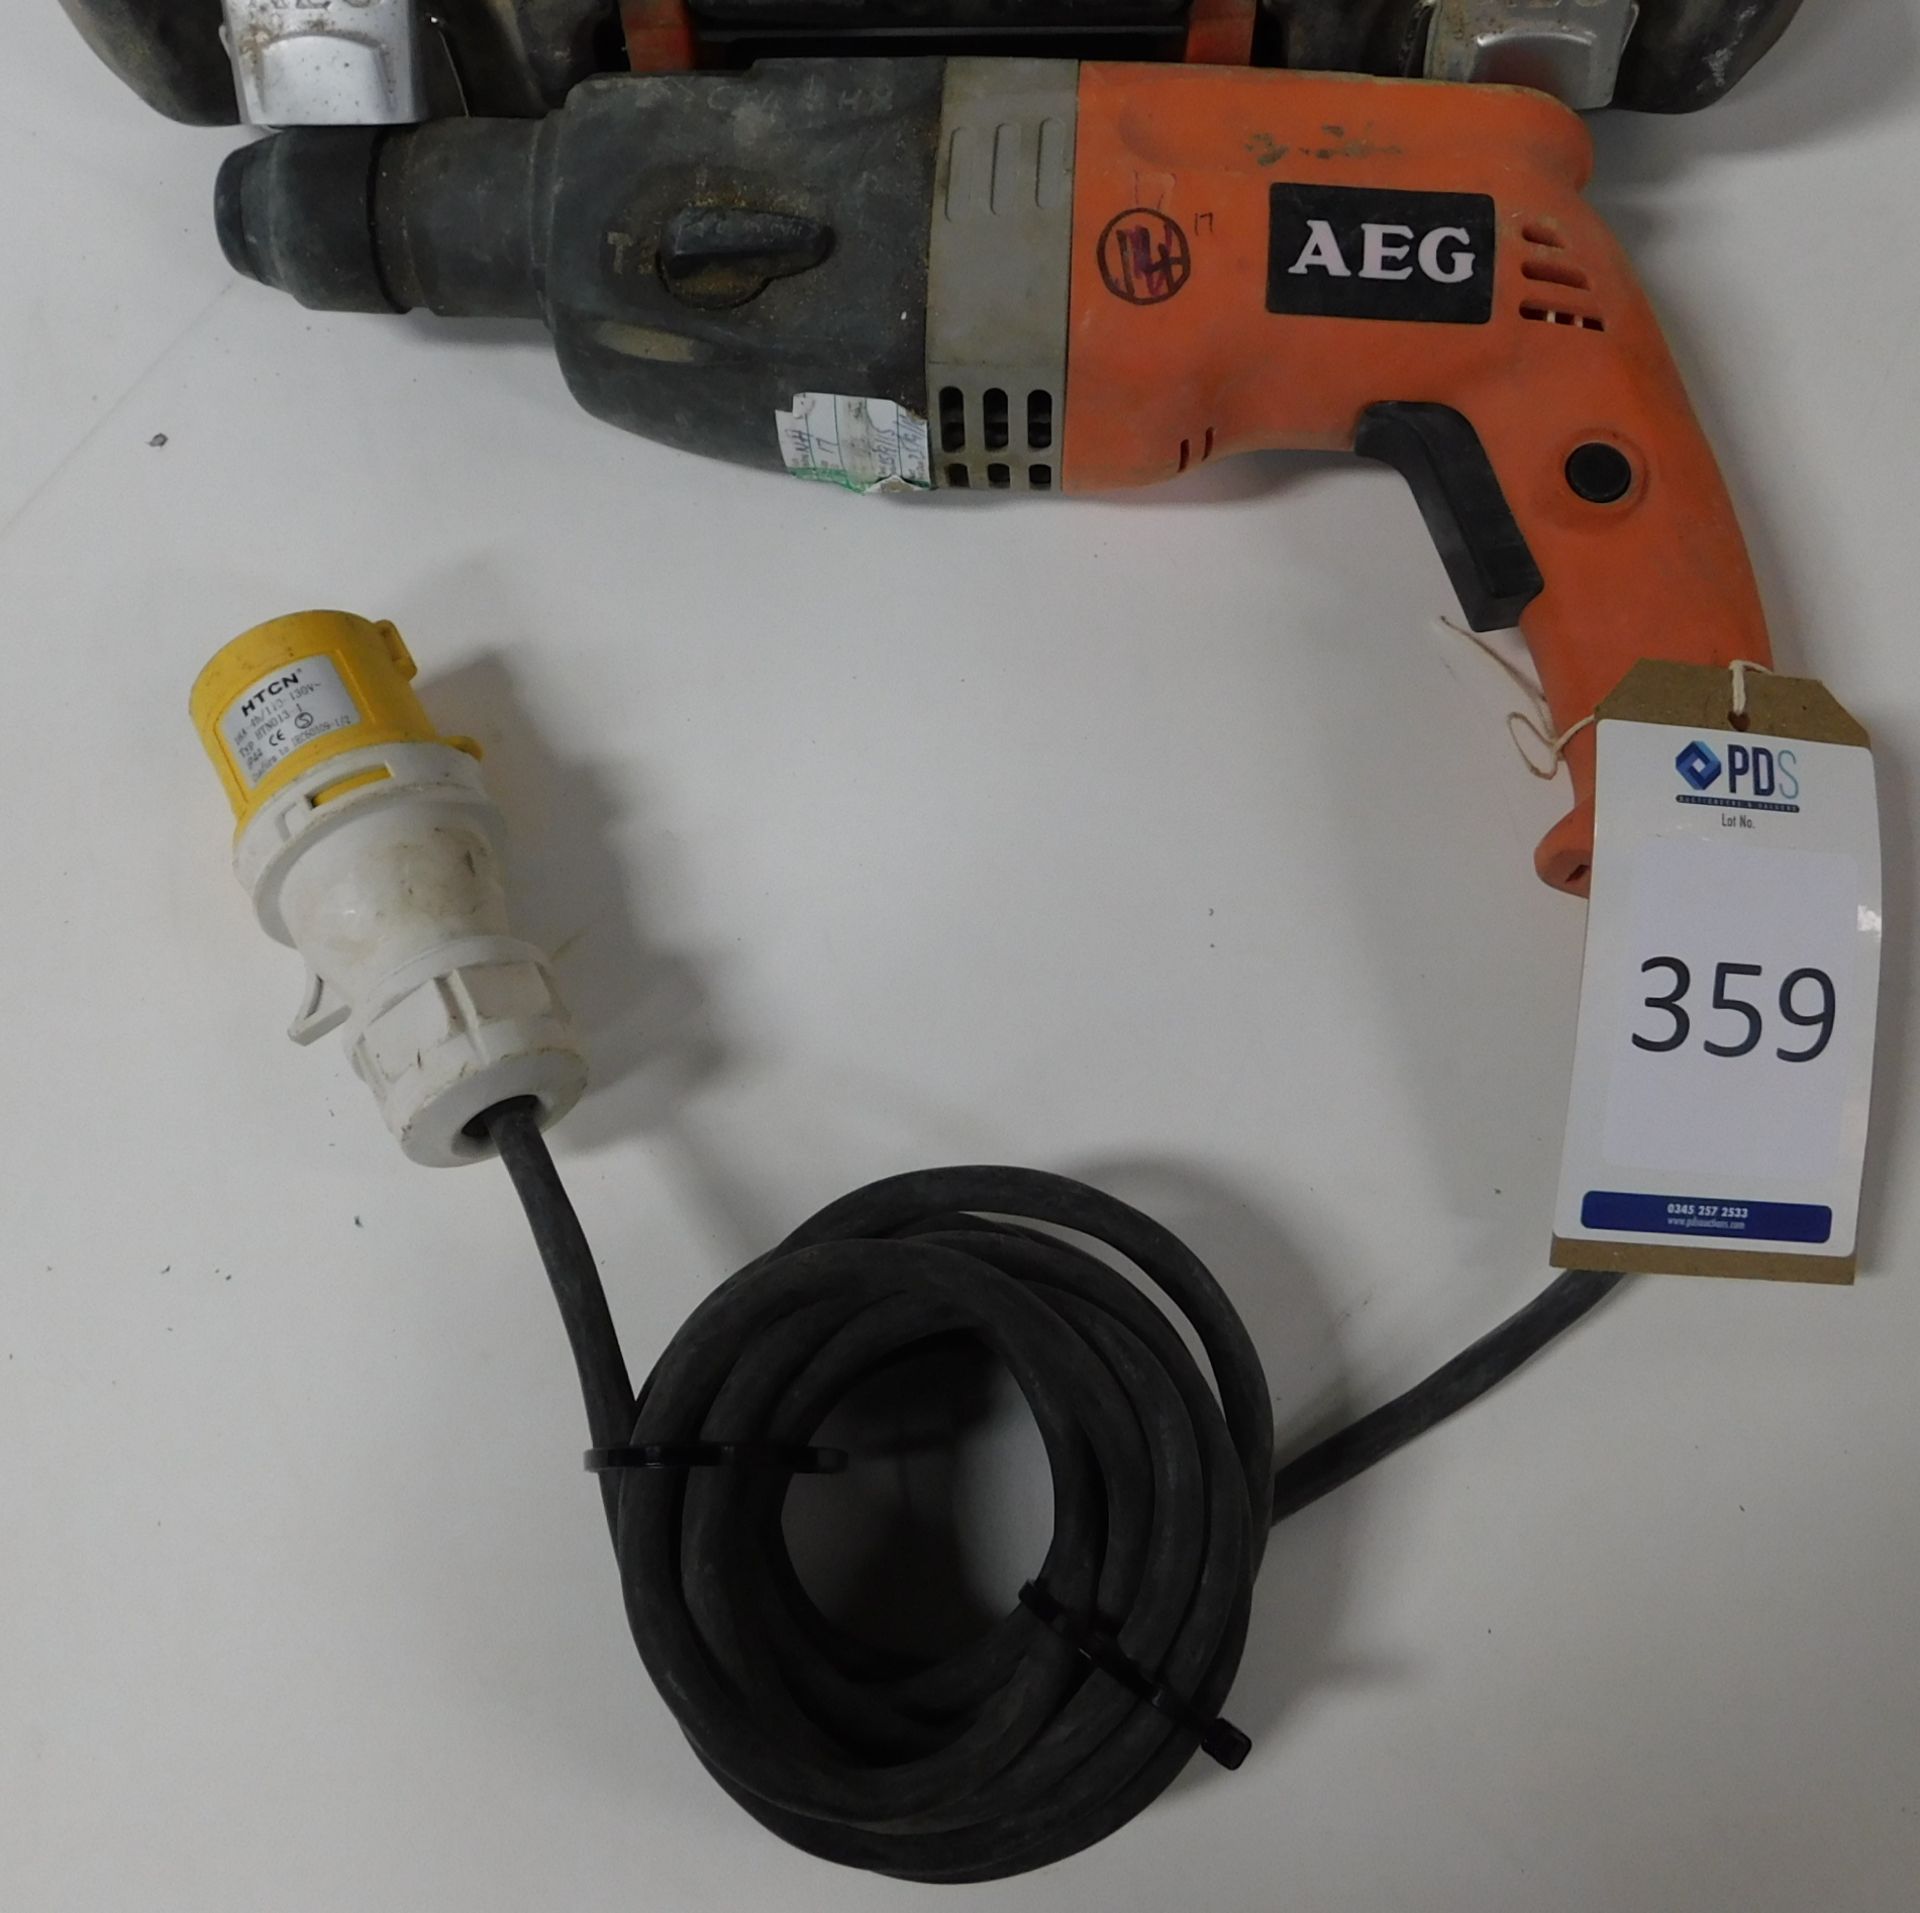 AEG BH 22 E Hammer Drill, 110v (Location: Brentwood - See General Notes for Details) - Image 2 of 3